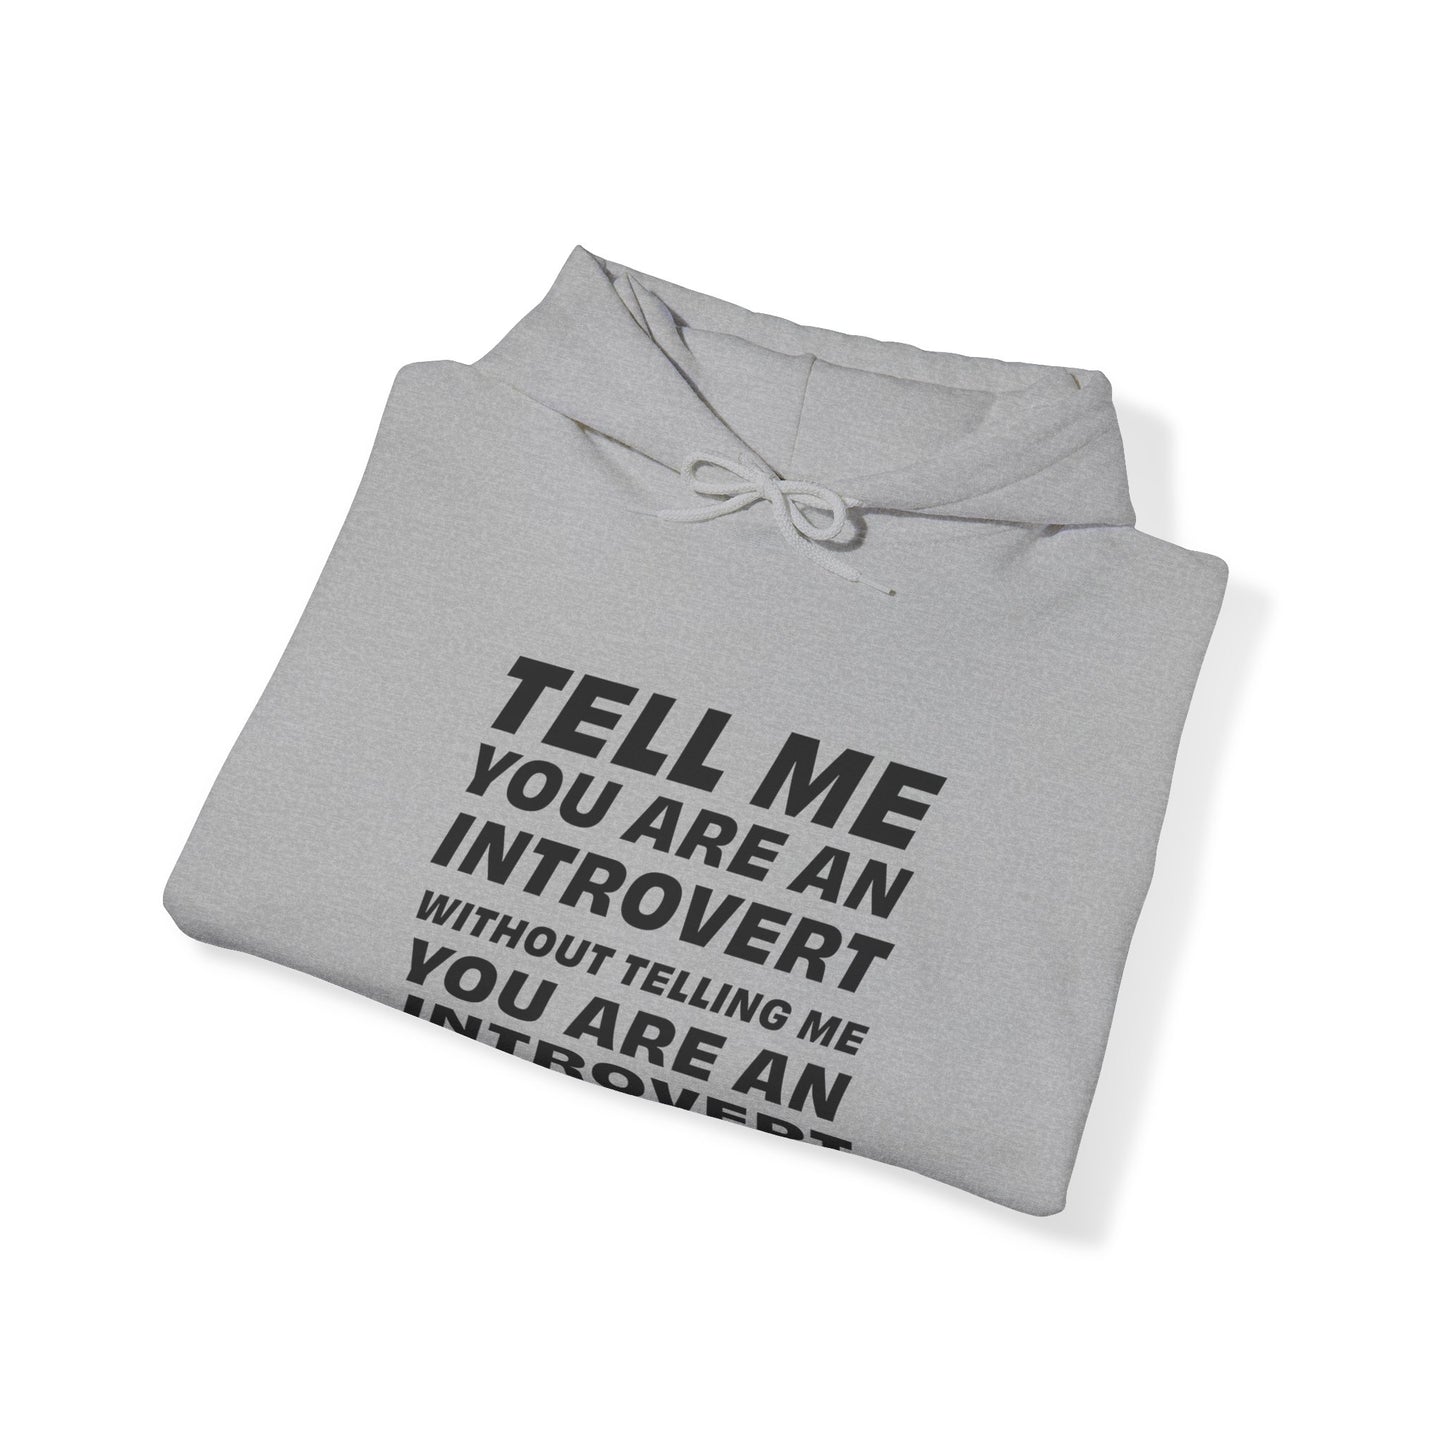 Tell Me You Are An Introvert Without Telling Me... Hooded Sweatshirt